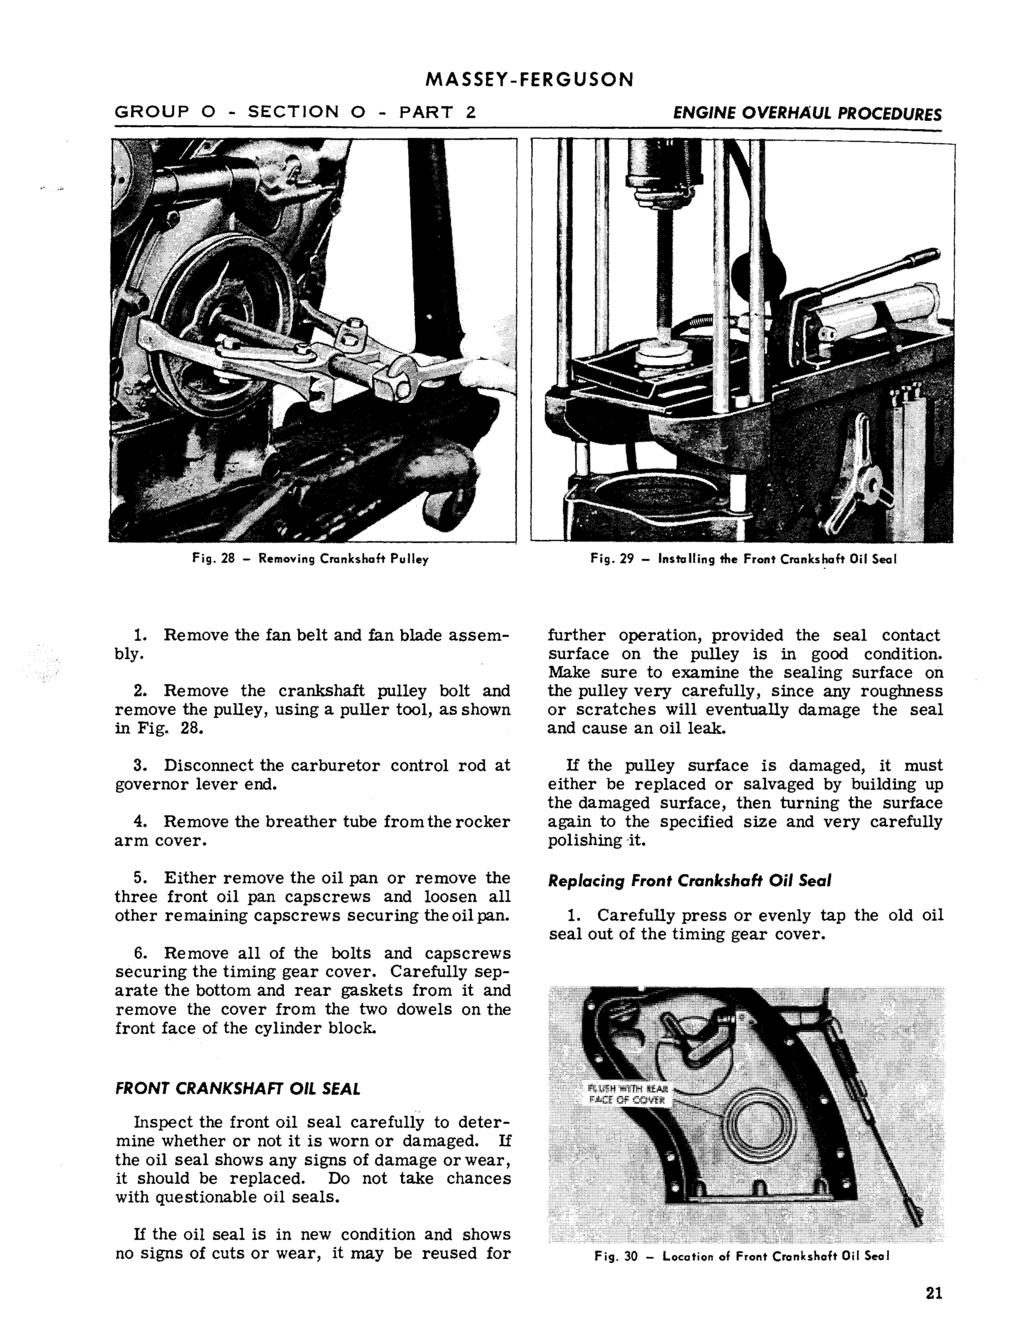 GROUP O - SECTION O - PART 2 ENGINE OVERHAUi. PROCEDURES Fig. 28 - Removing Crankshaft Pulley Fig. 29 - Installing the Front Cranks~aft Oil Seal. Remove the fan belt and fan blade assembly. 2. Remove the crankshaft pulley bolt and remove the pulley, using a puller tool, as shown in Fig.